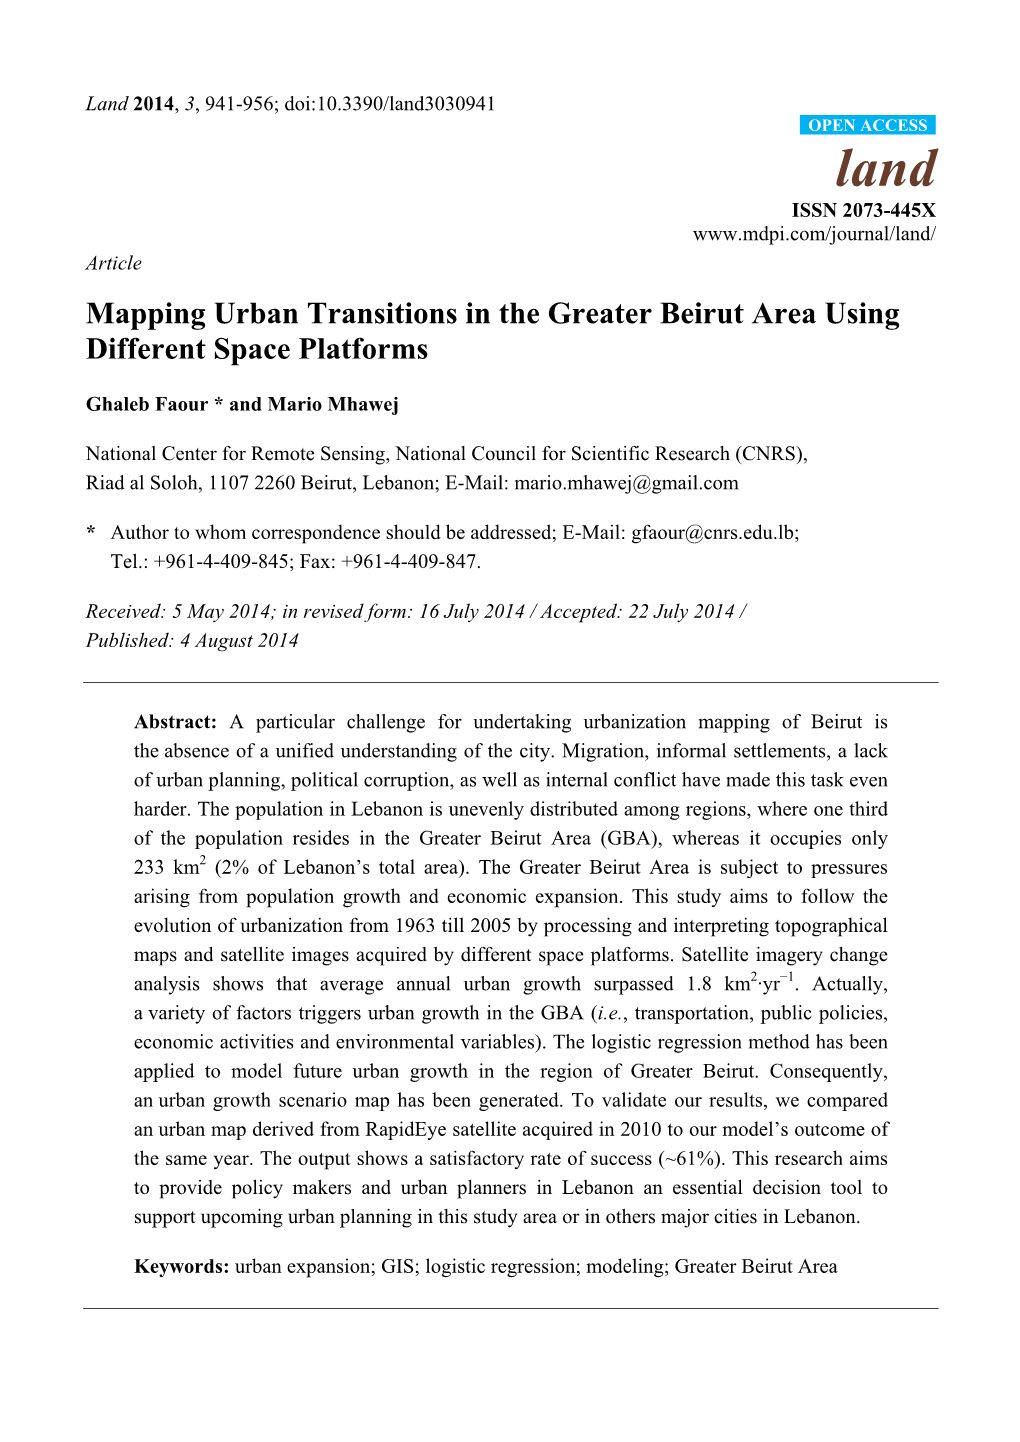 Mapping Urban Transitions in the Greater Beirut Area Using Different Space Platforms